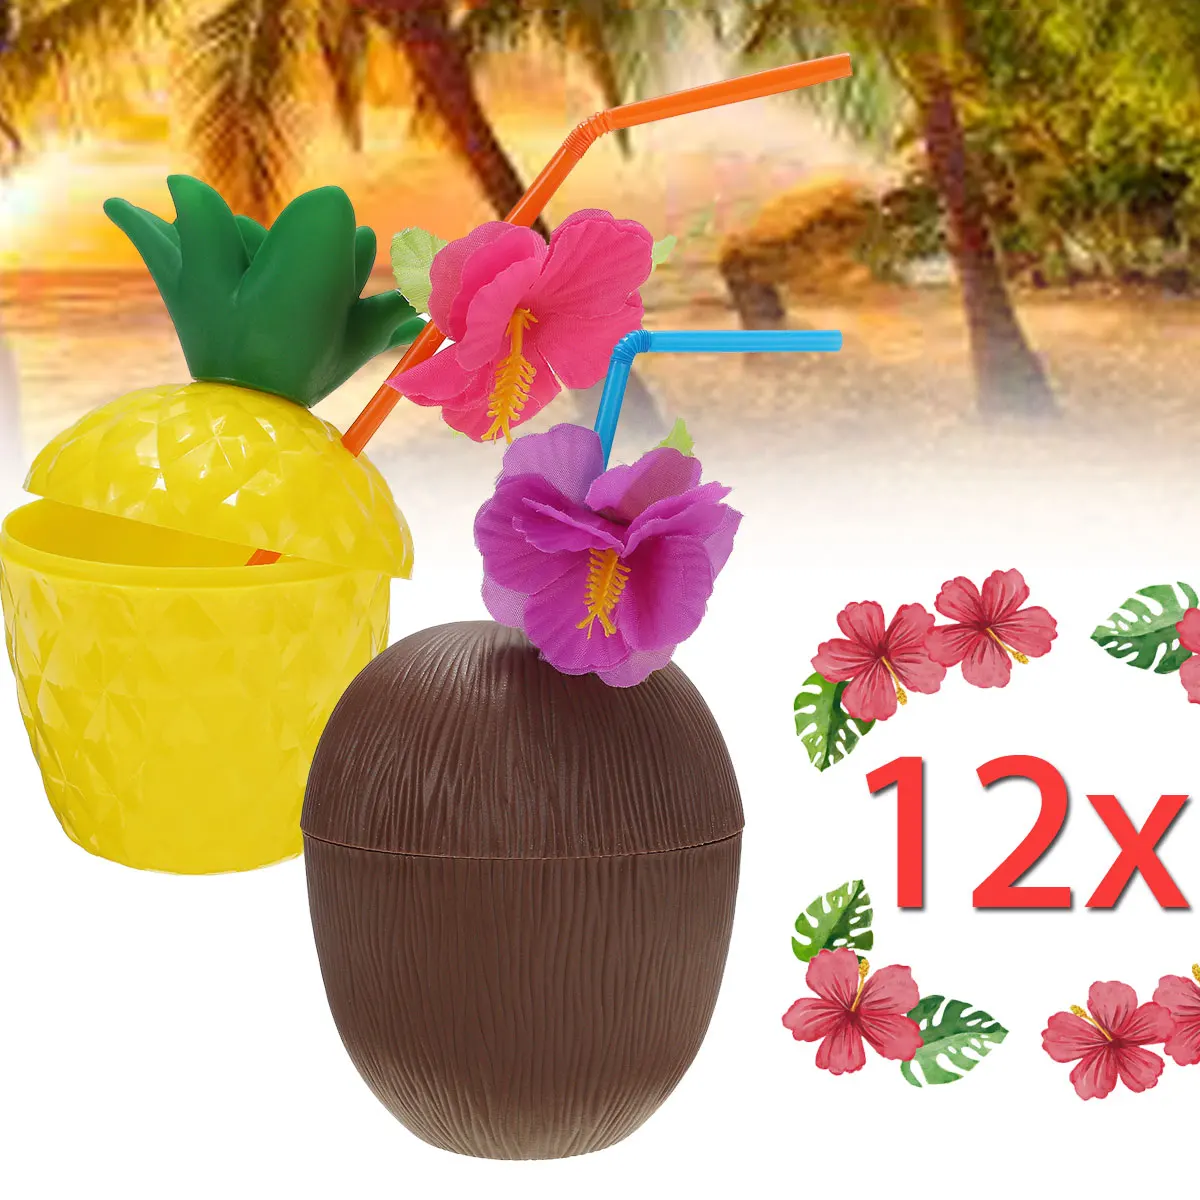 

Hawaiian Beach Drink Cup with Straw Decoration Drinking Straw Plastic Coconut Pineapple for Party Birthday Decorations